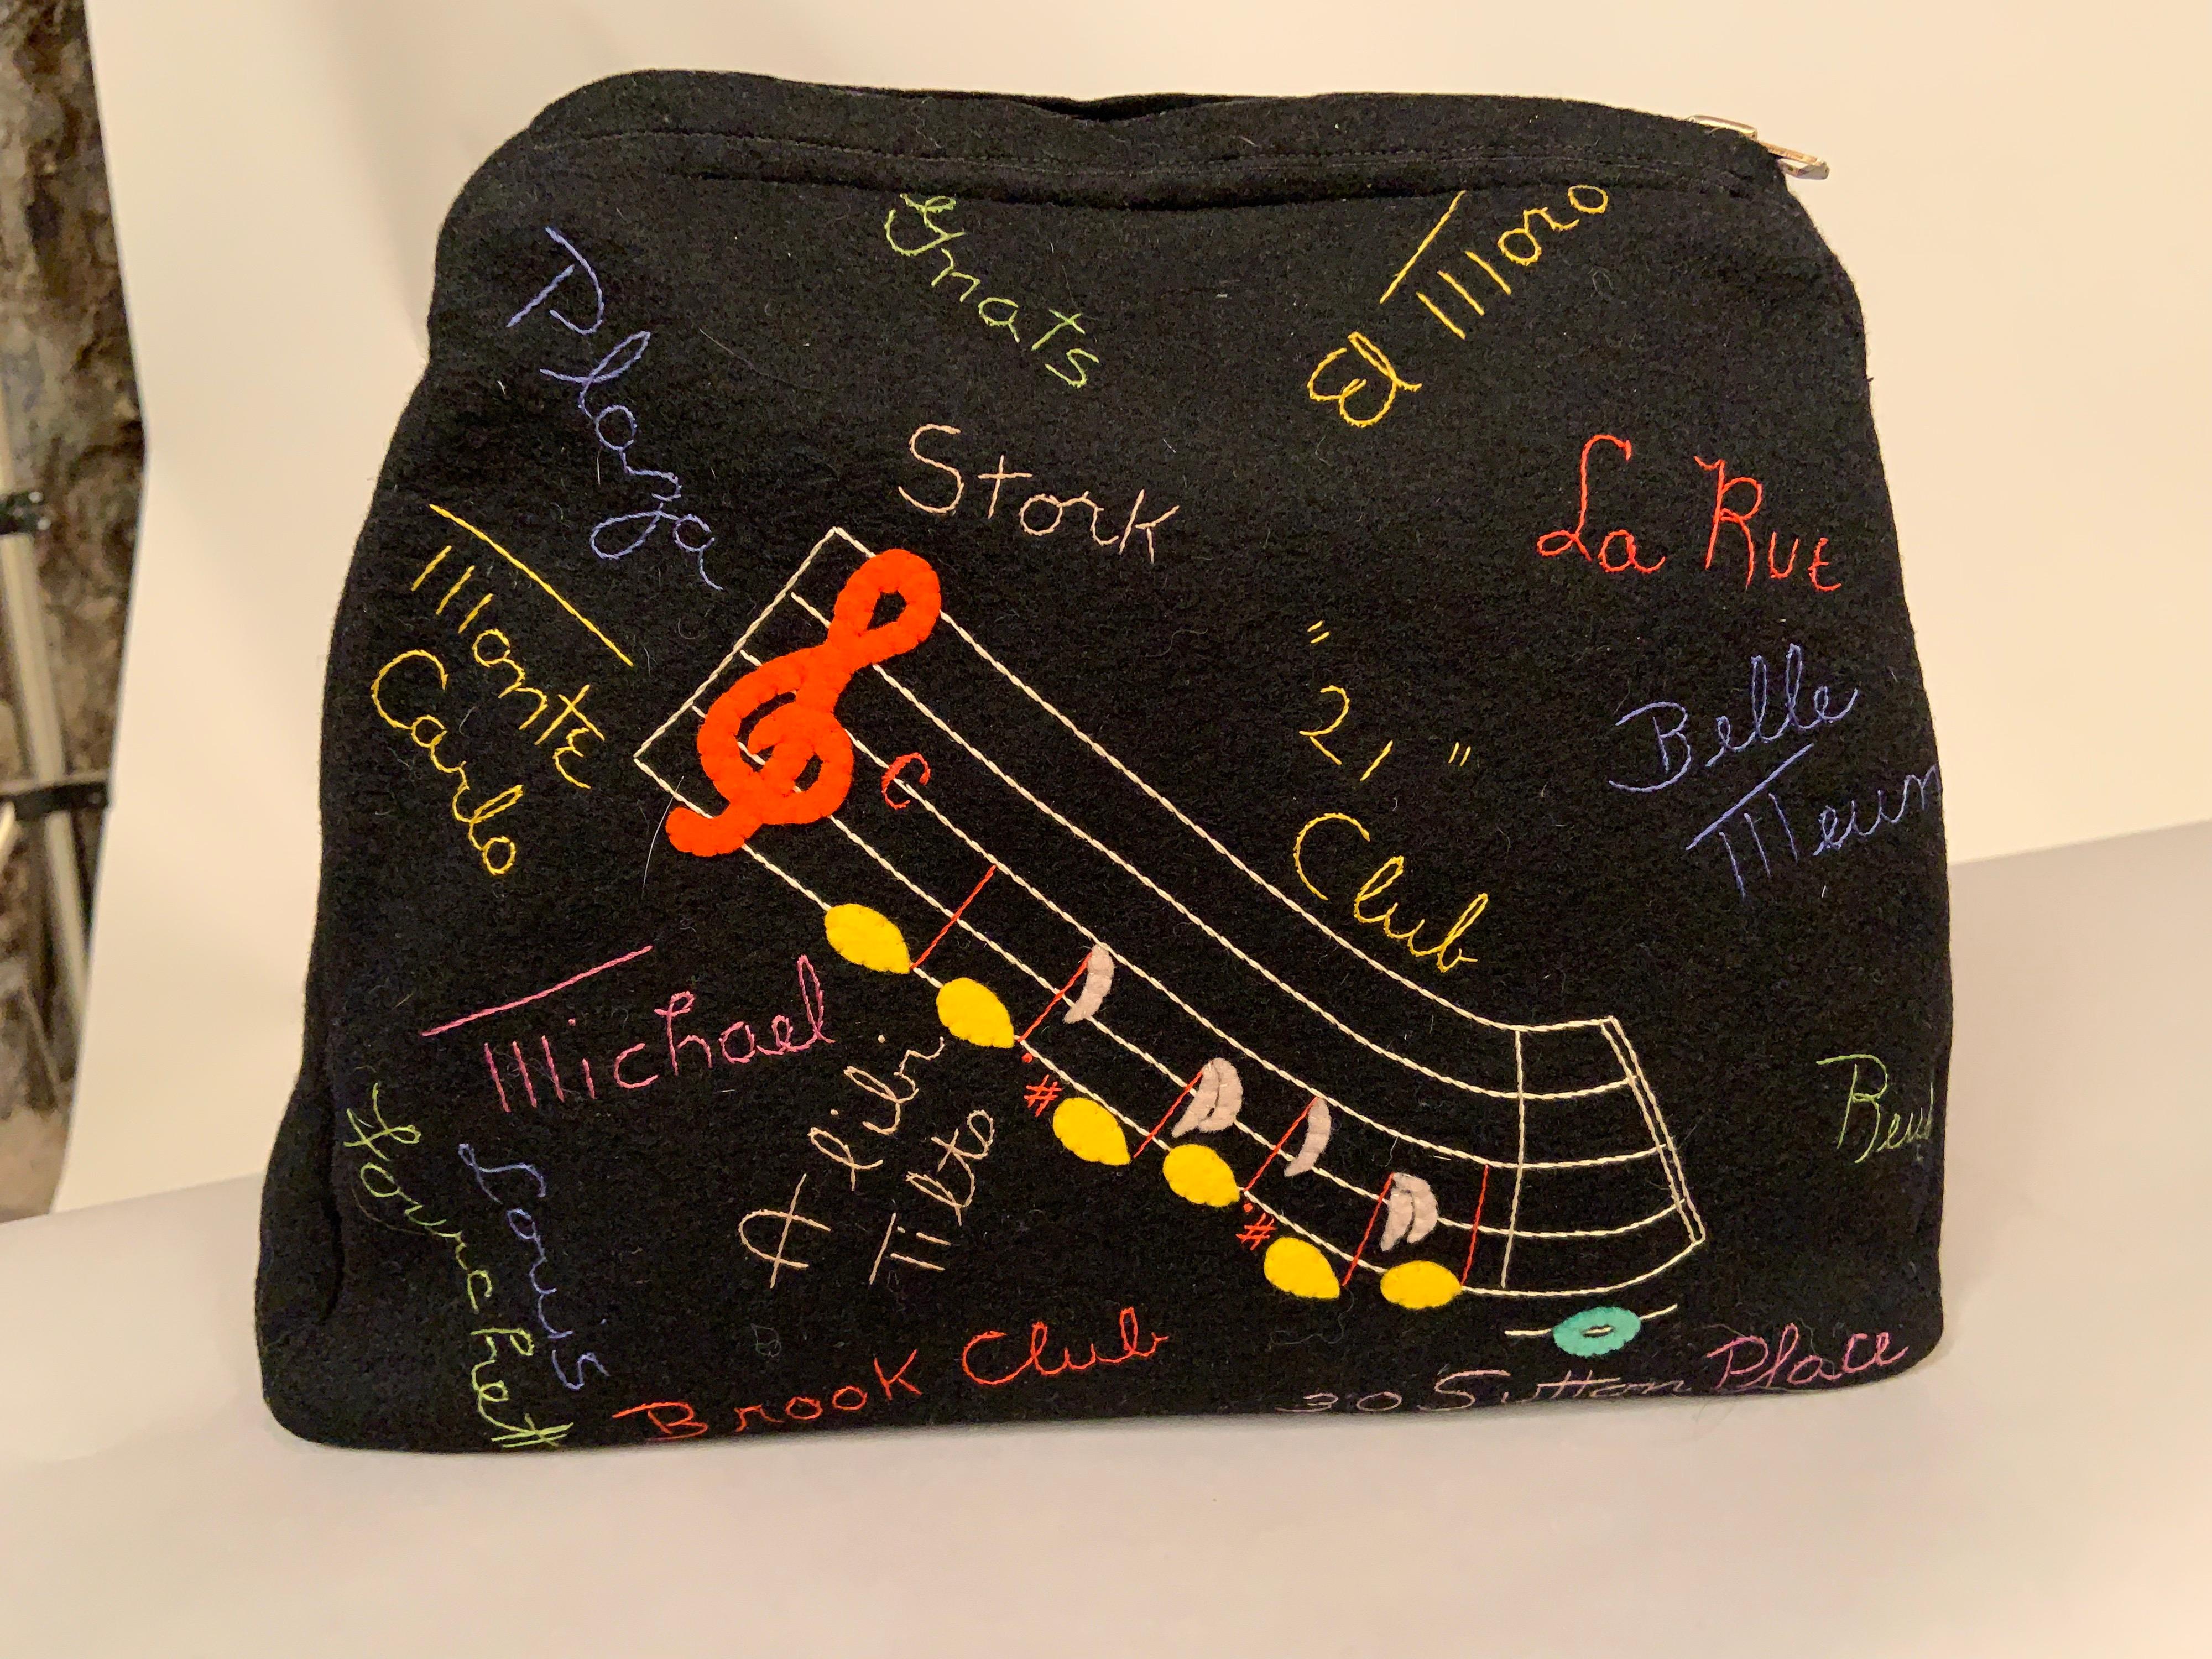 A black wool felt clutch is appliqued on the front side with a cheerful yellow checker taxi cab carrying two passengers. It is surrounded by embroidered names of chic retail stores in  New York City, vacation destinations, race tracks etc. from the